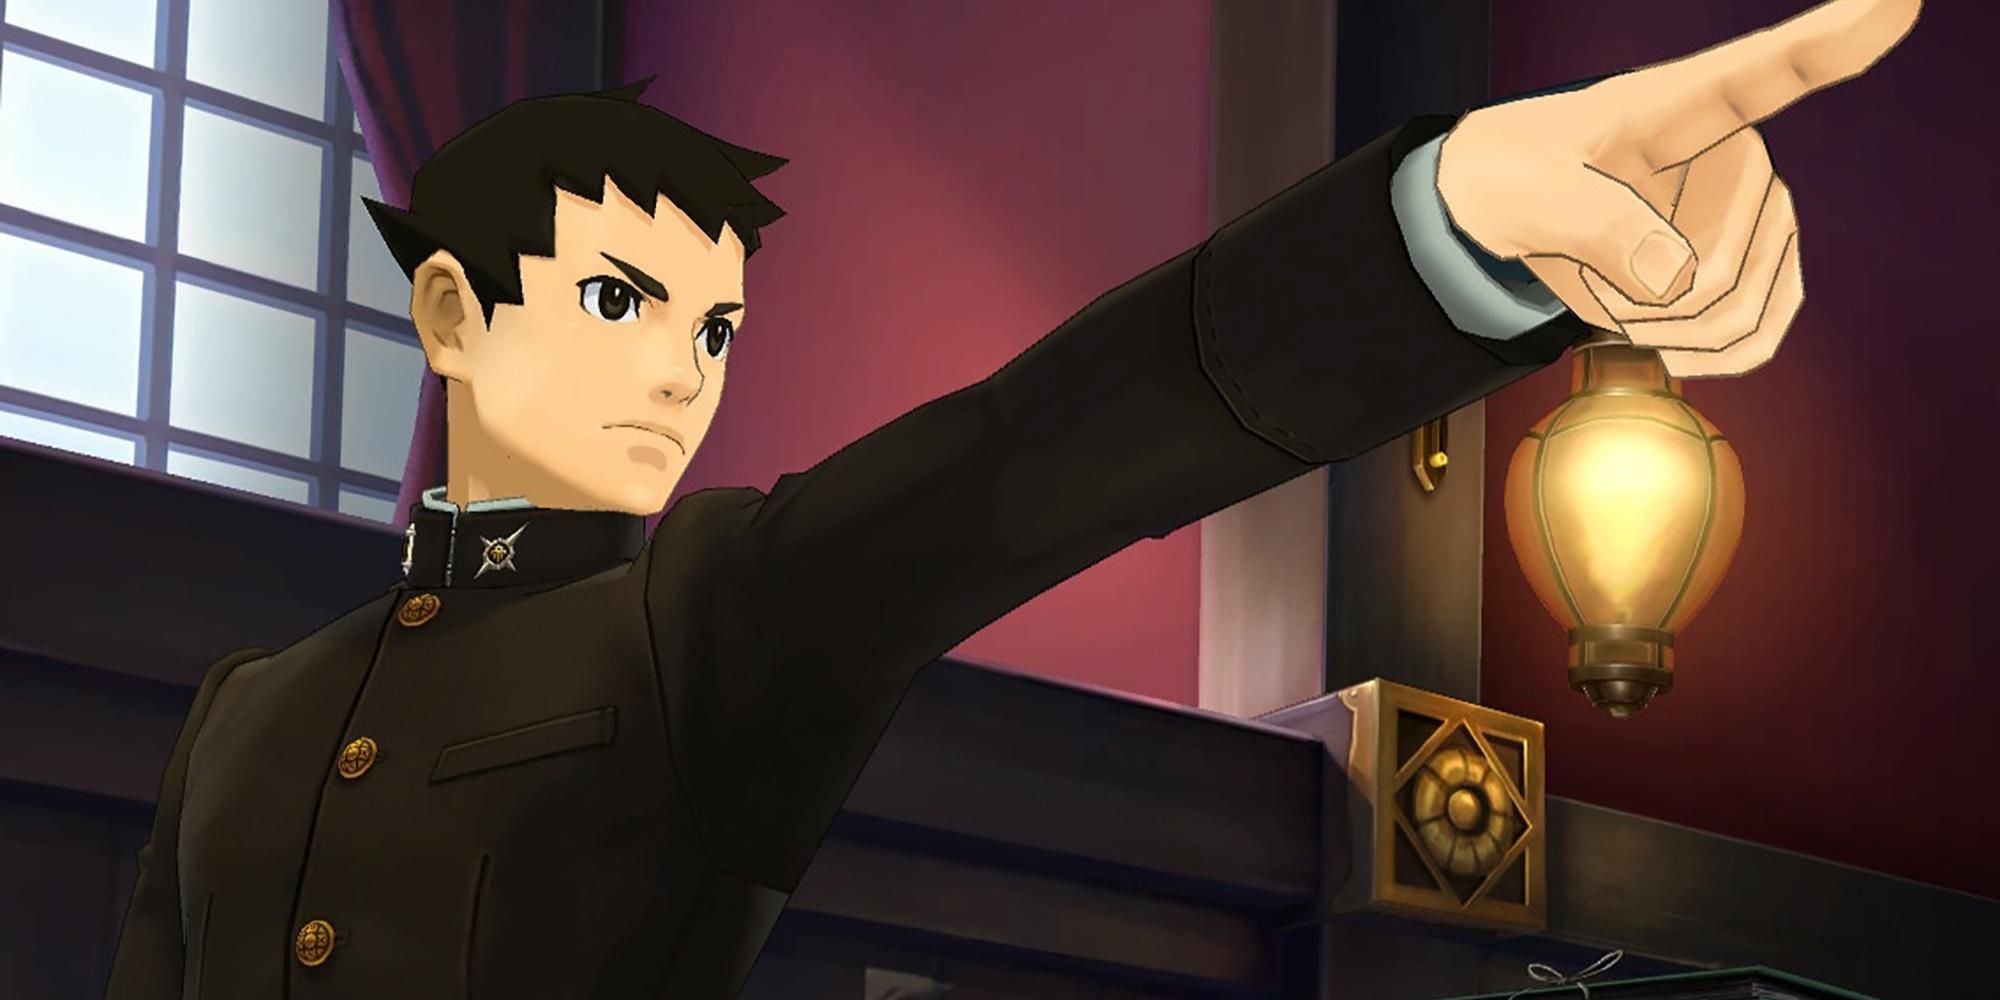 Ryunosuke investigating in The Great Ace Attorney Chronicles